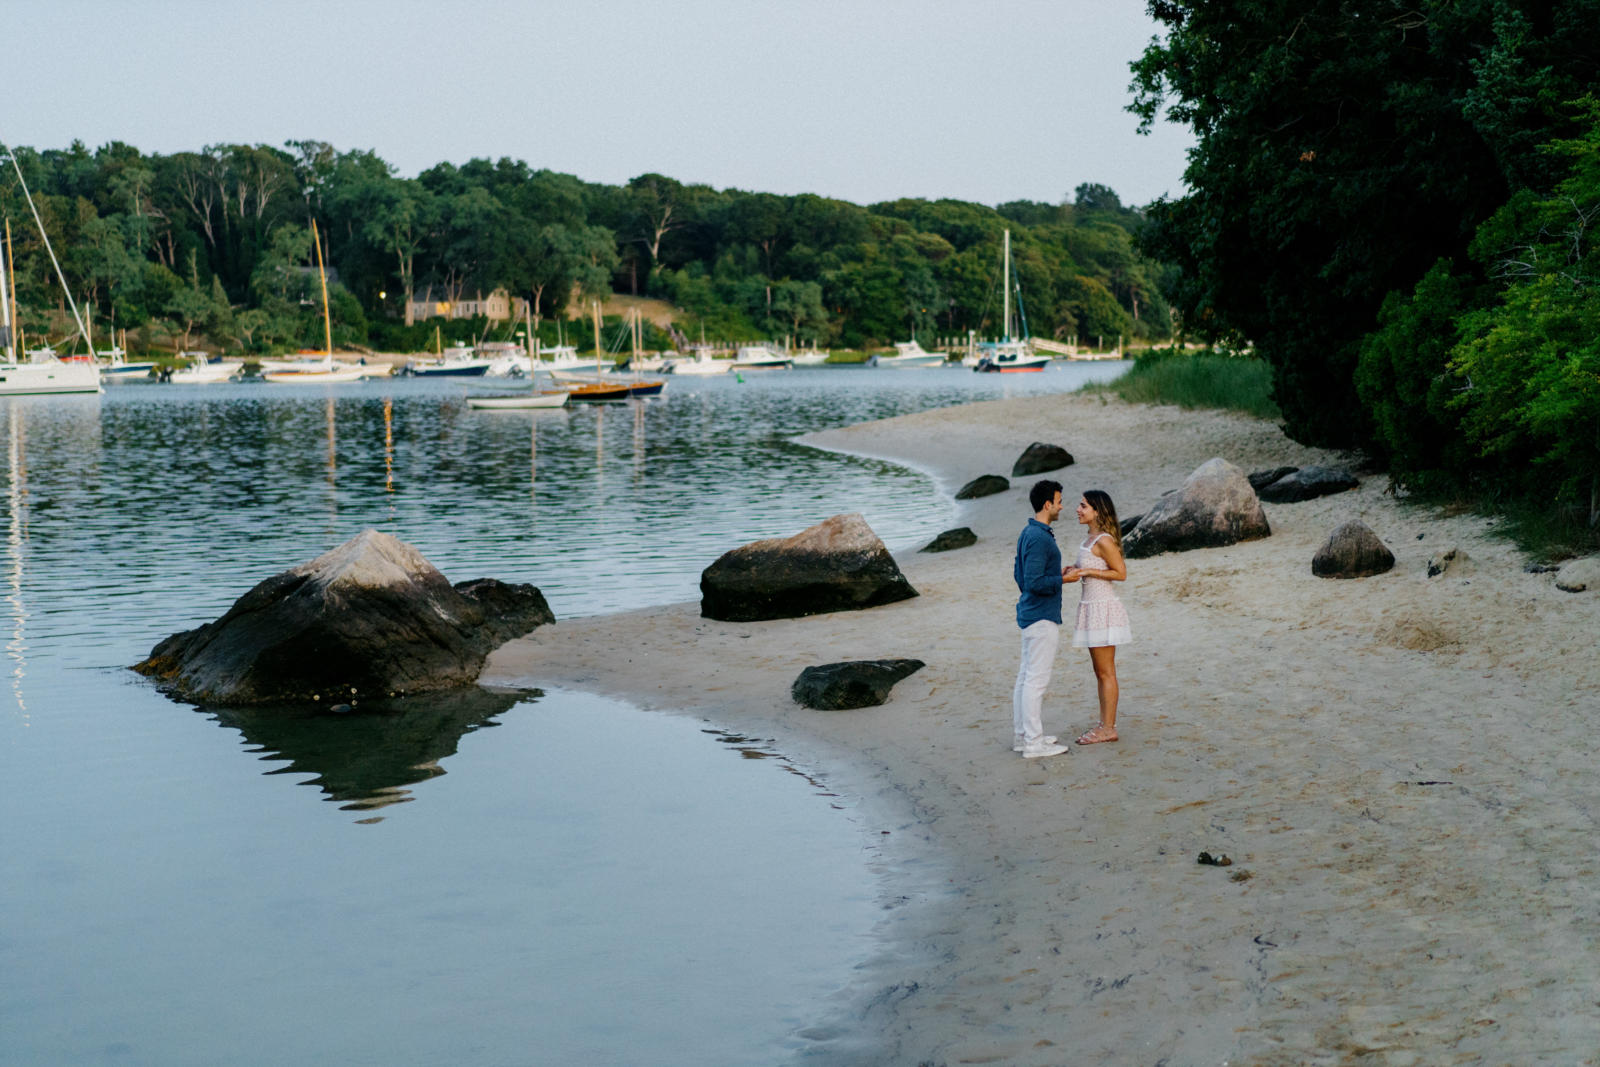 romantic proposal story on cape cod